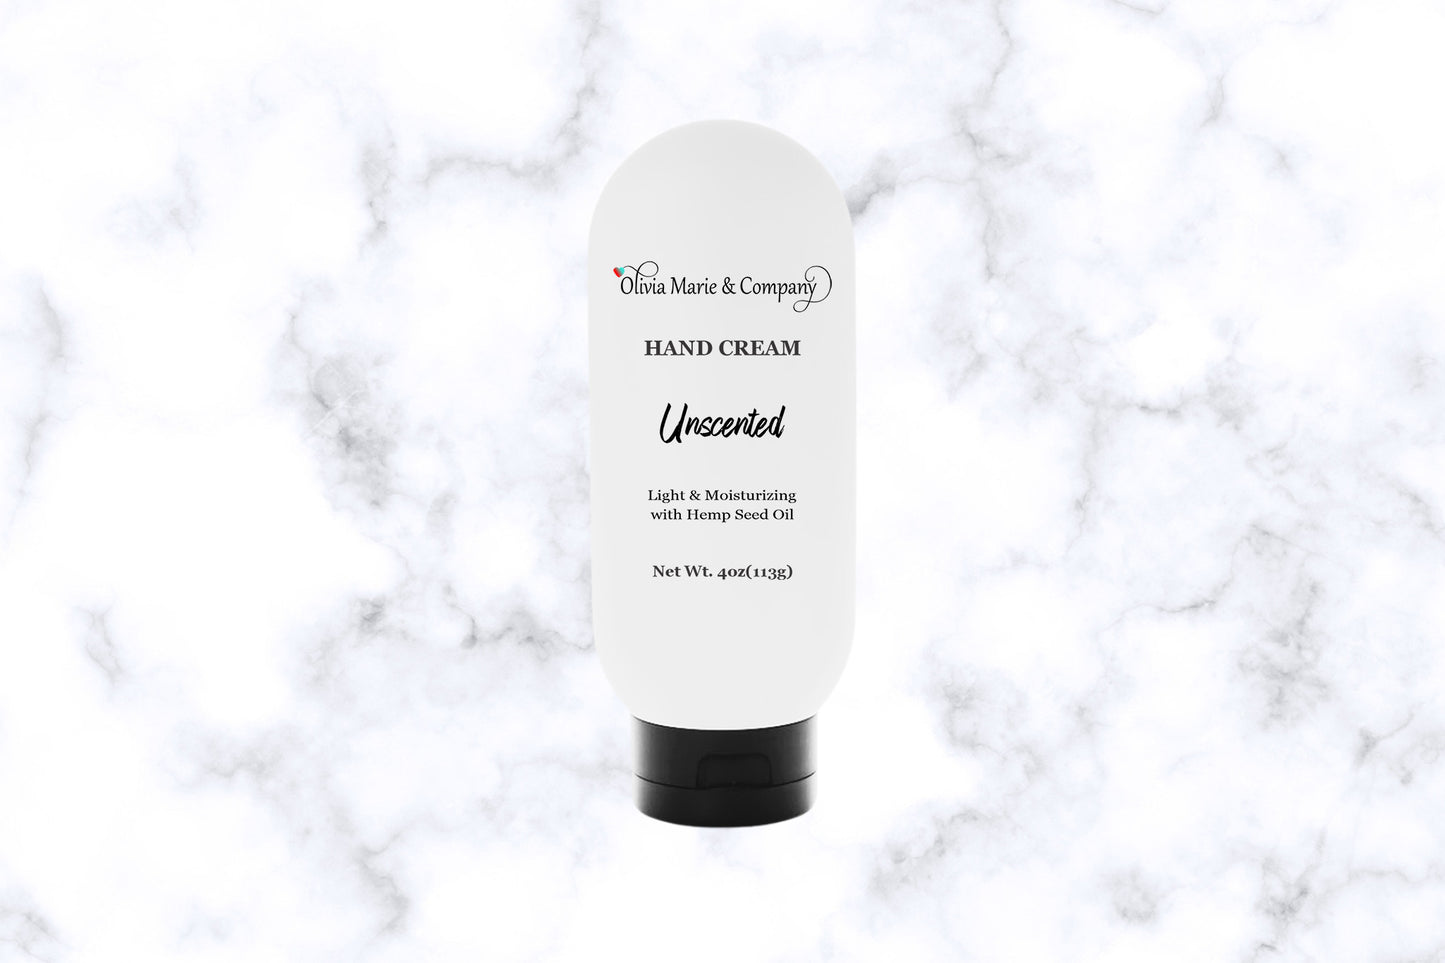 Unscented hand cream in a white squeeze tube with a black cap.